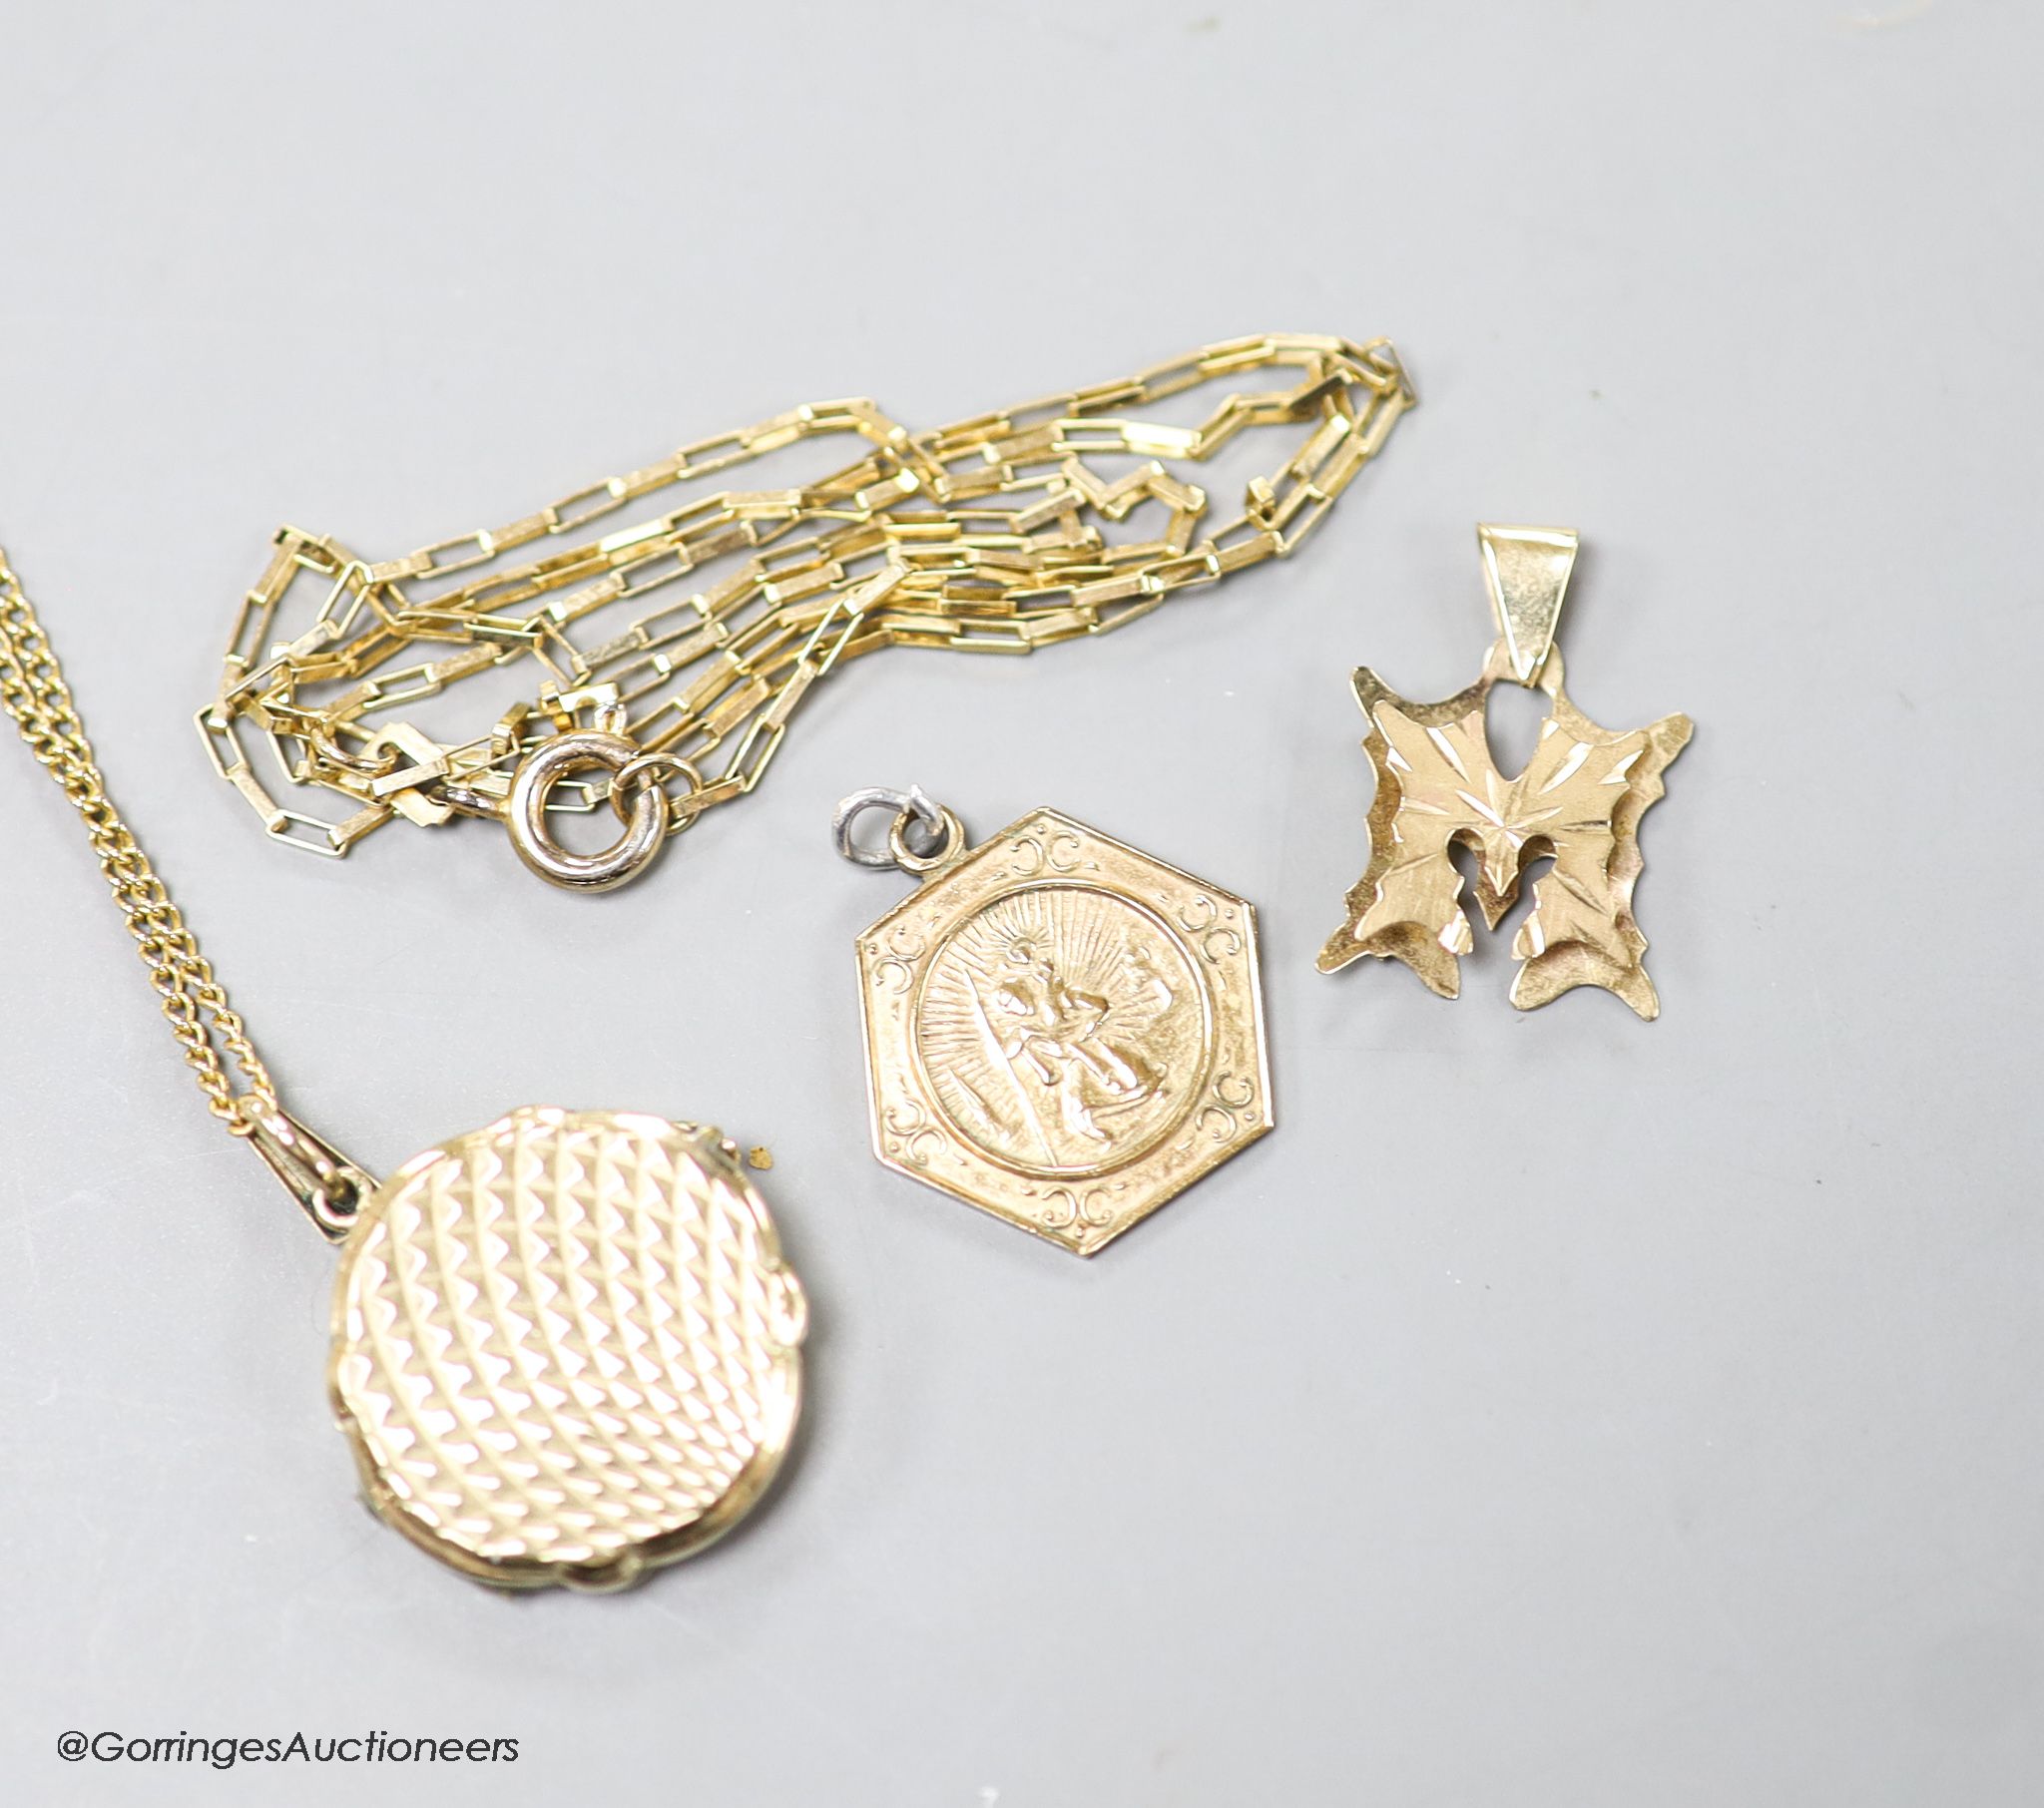 Two modern 9ct gold fine link chains, one with locket and two other 9ct gold pendants